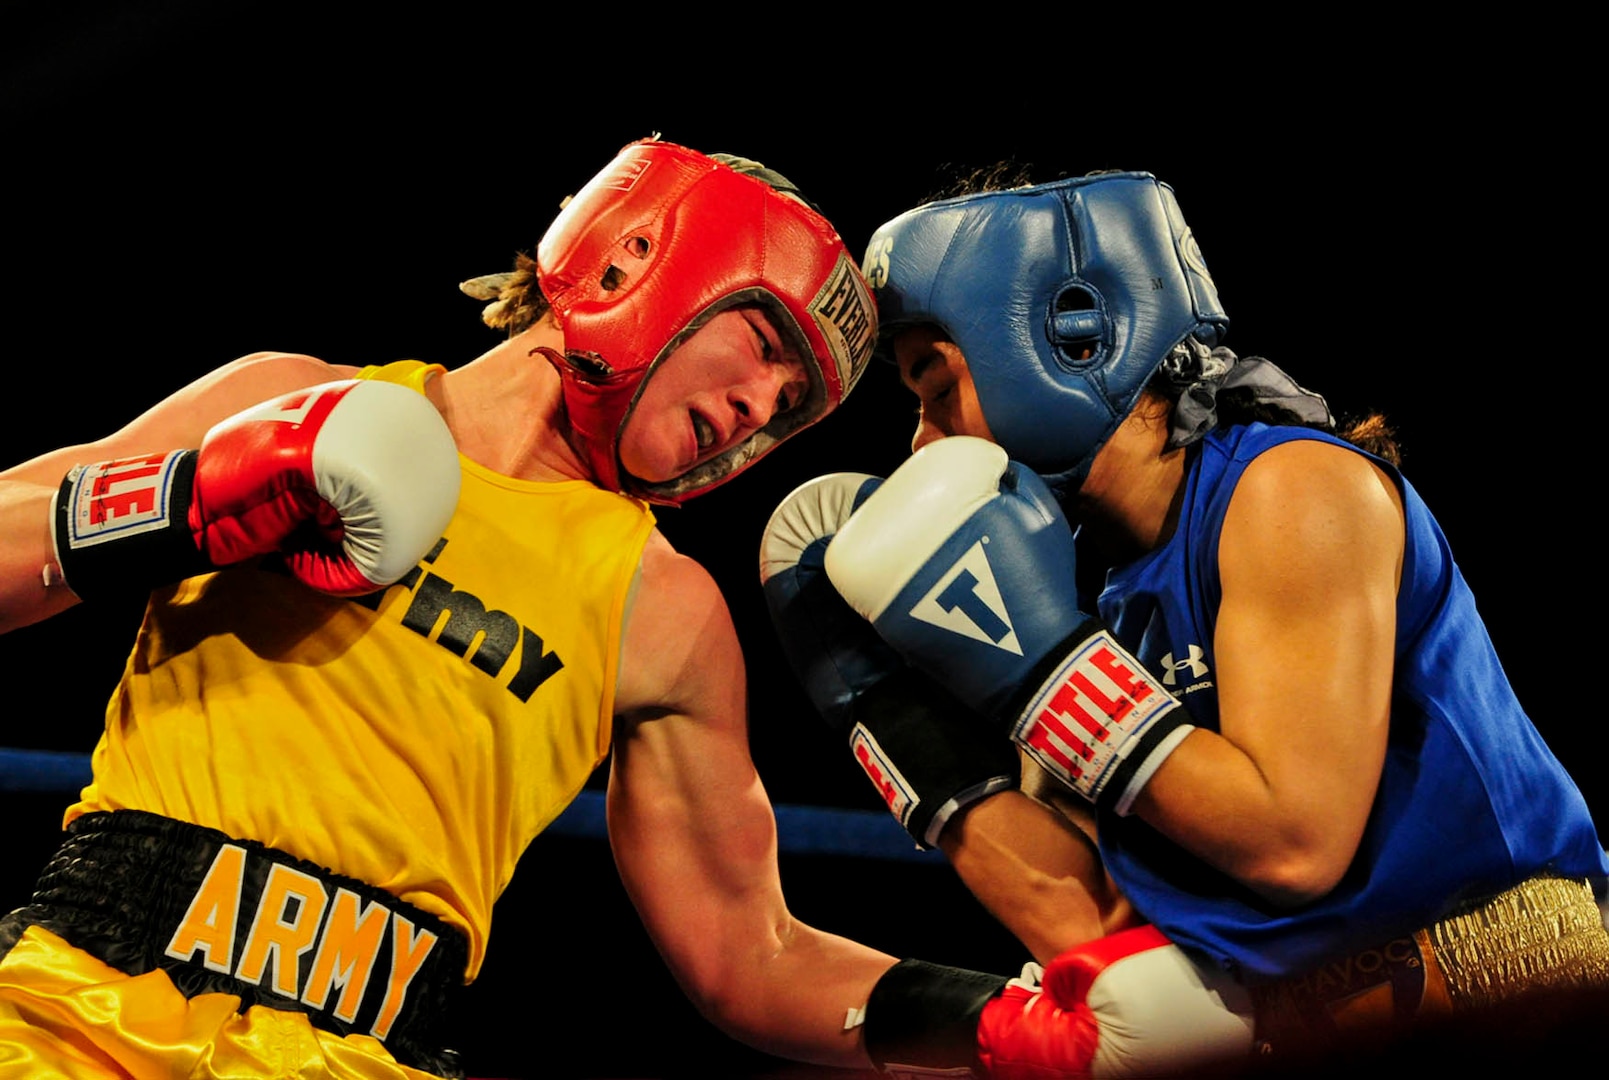 Army rules in finals of 2011 Armed Forces Boxing Championships > Joint